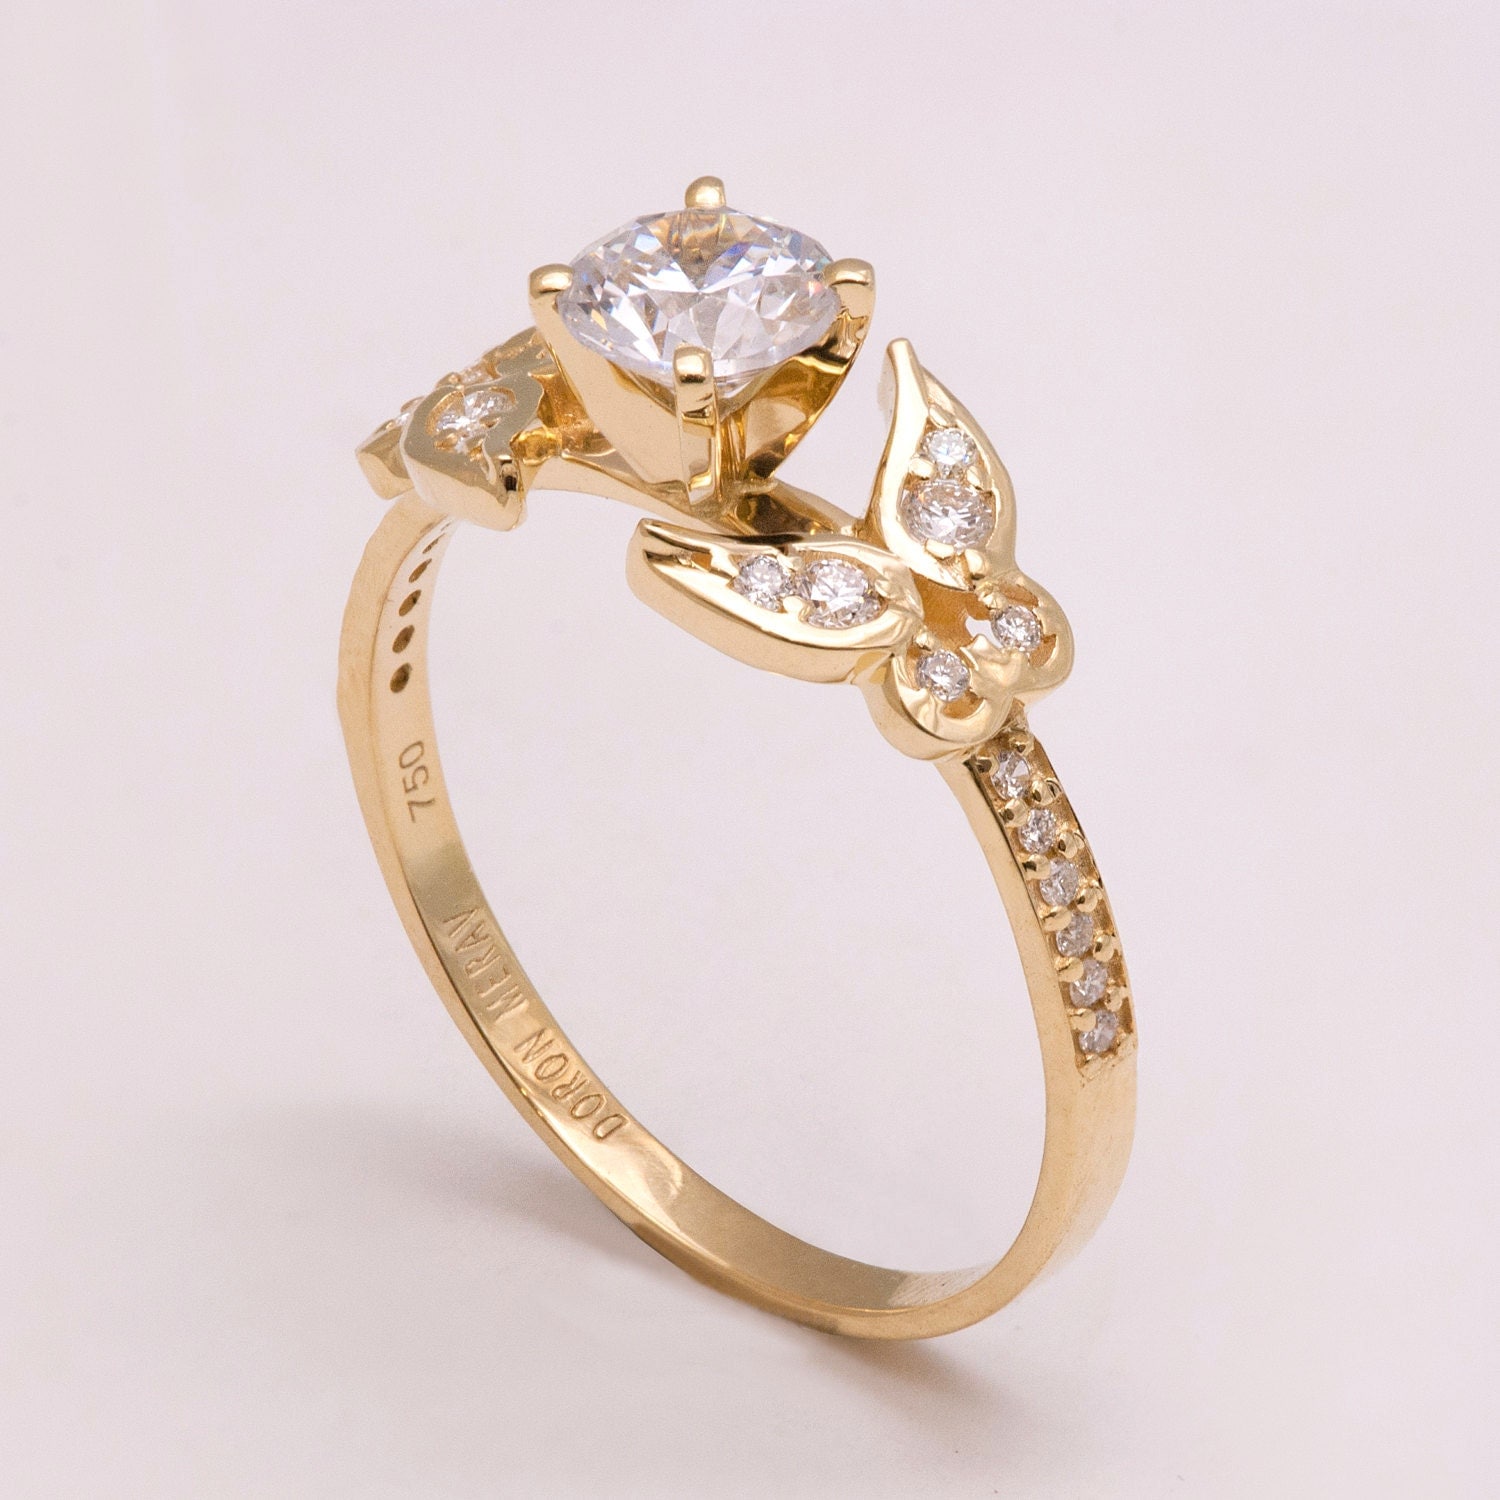 Butterfly Engagement Ring 14K Gold and Diamond engagement